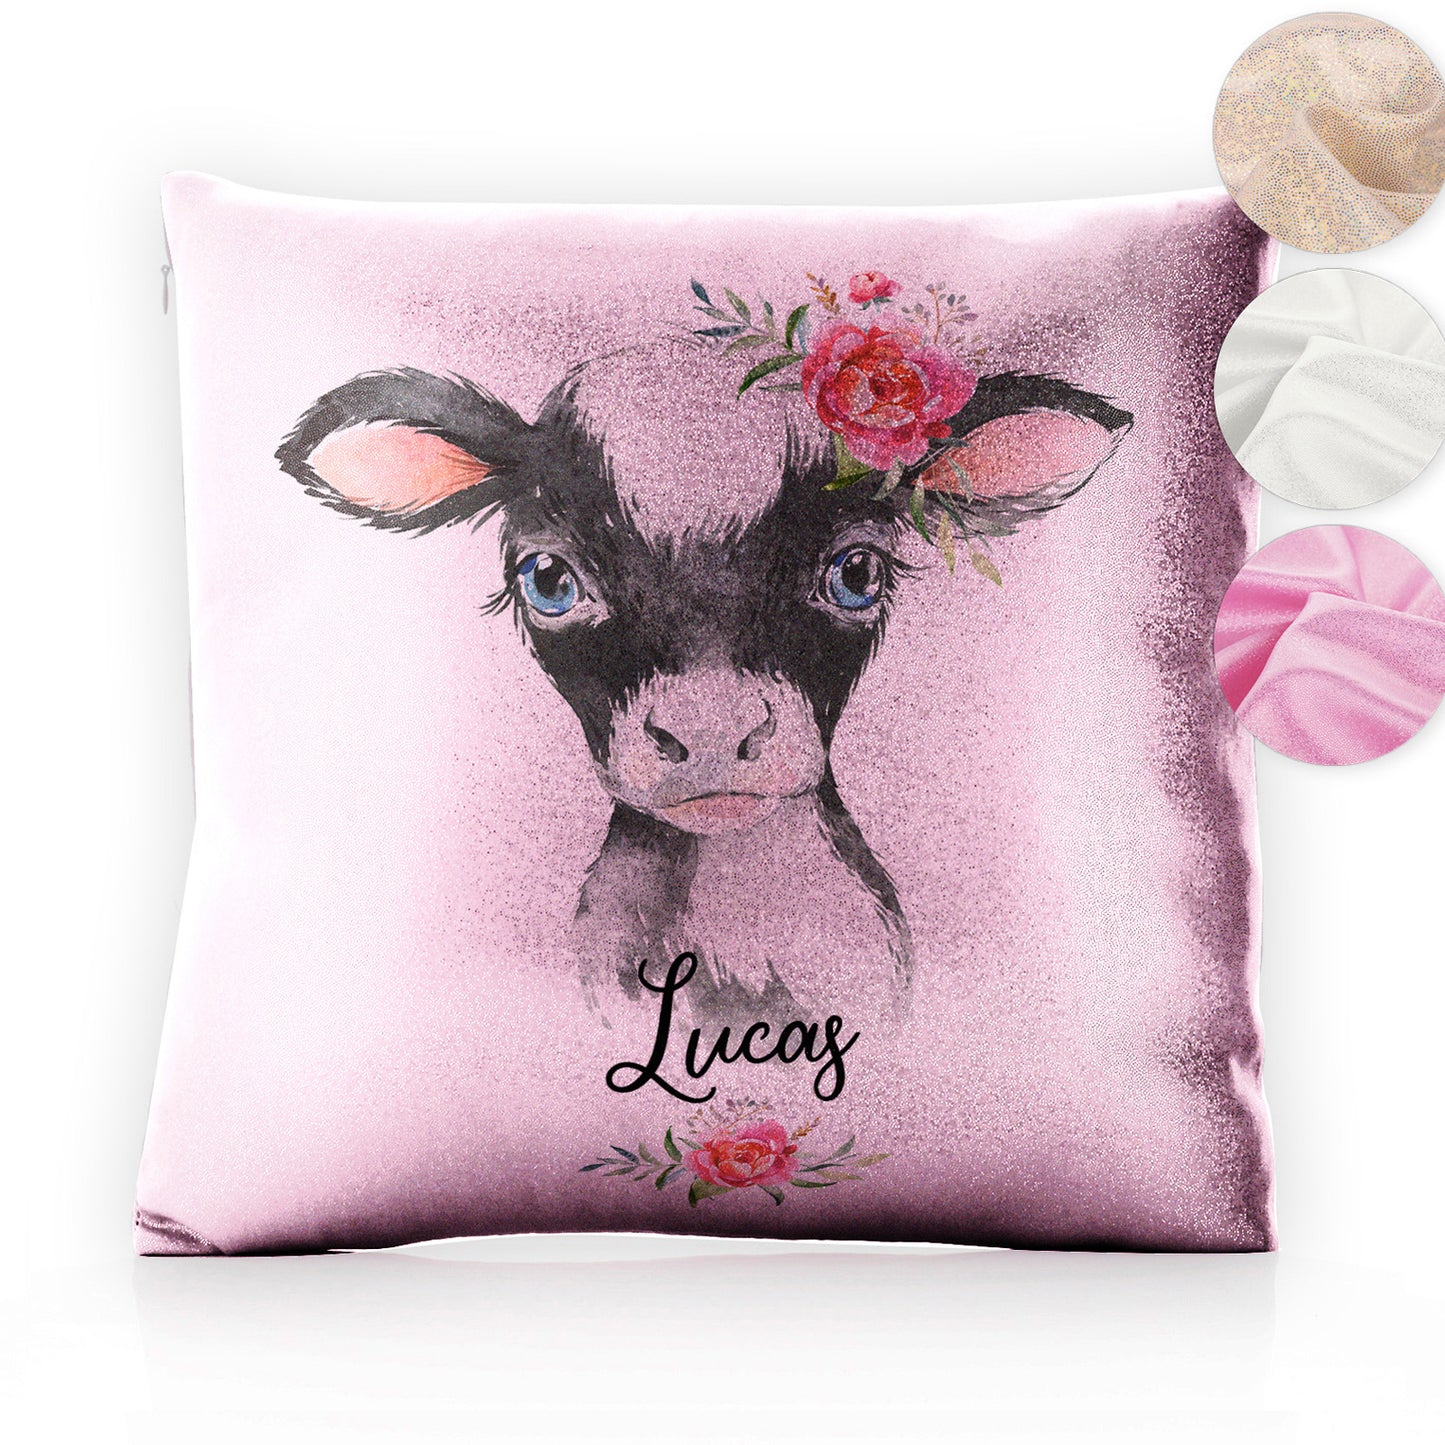 Personalised Glitter Cushion with Black and White Cow Pink Rose Flowers and Cute Text